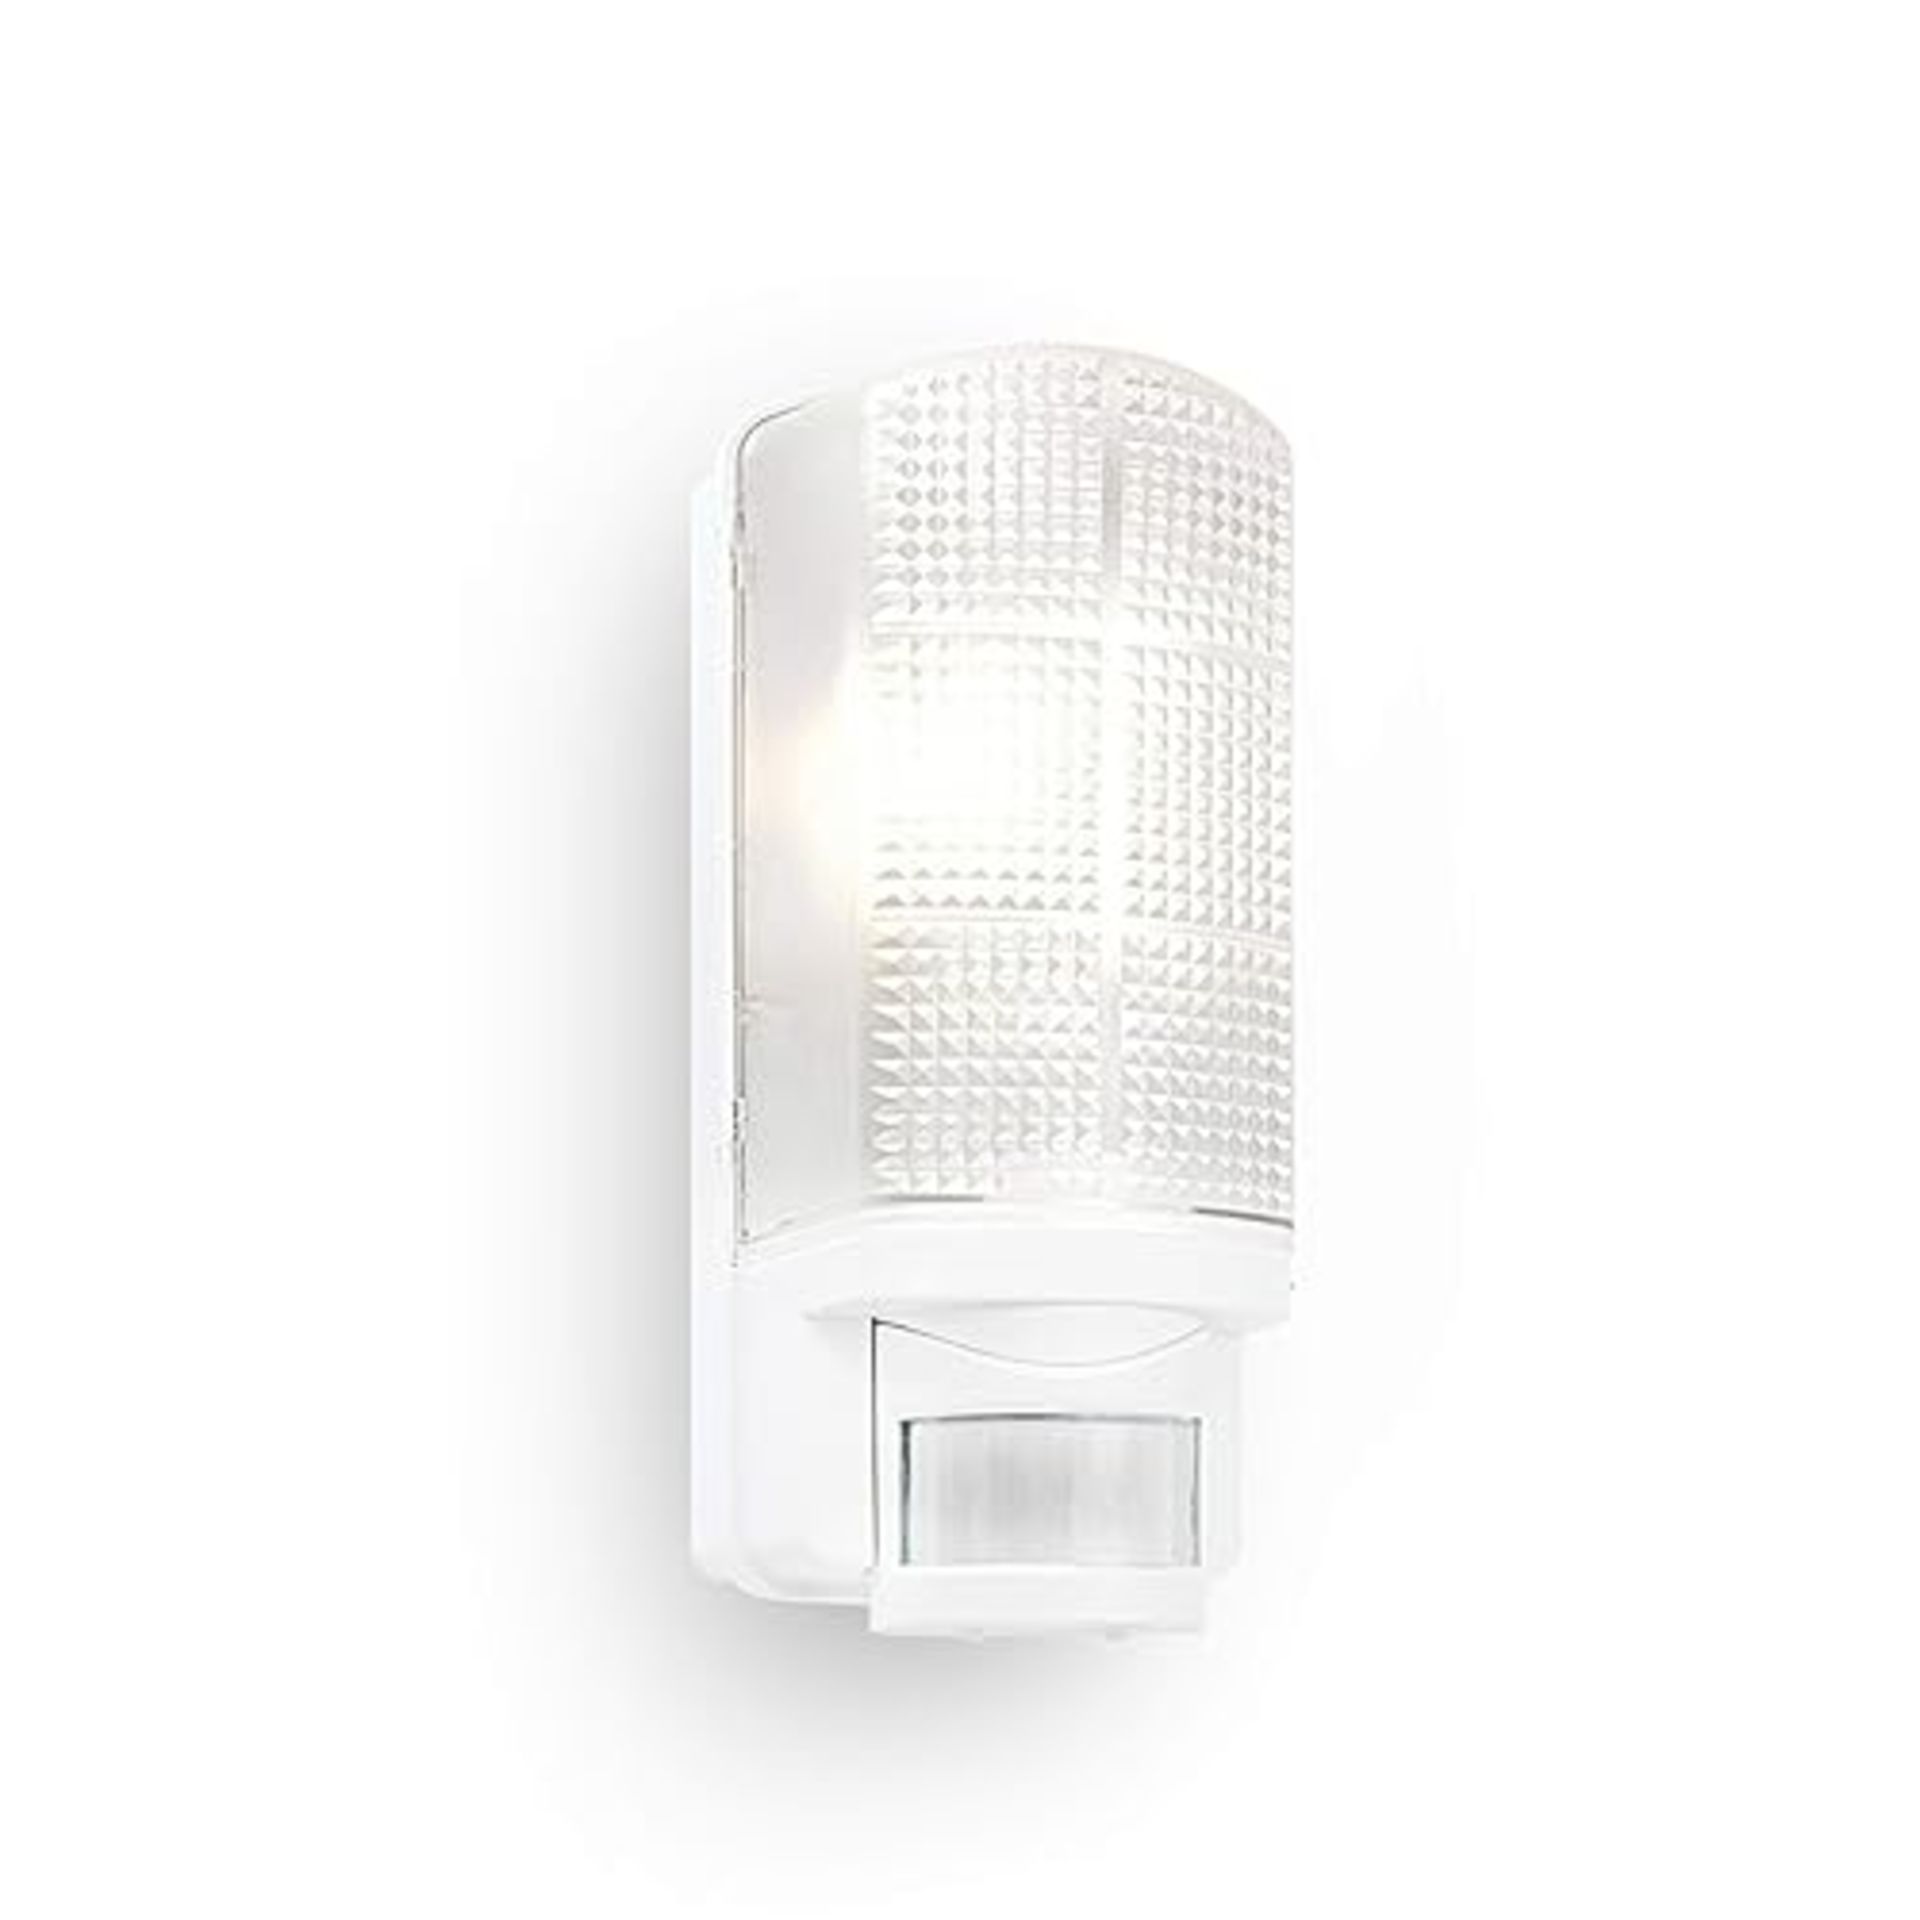 Motion Outdoor Lights Mains Powered - PIR Lights Outdoor - Bulkhead Wall Lights With Motion Senso...